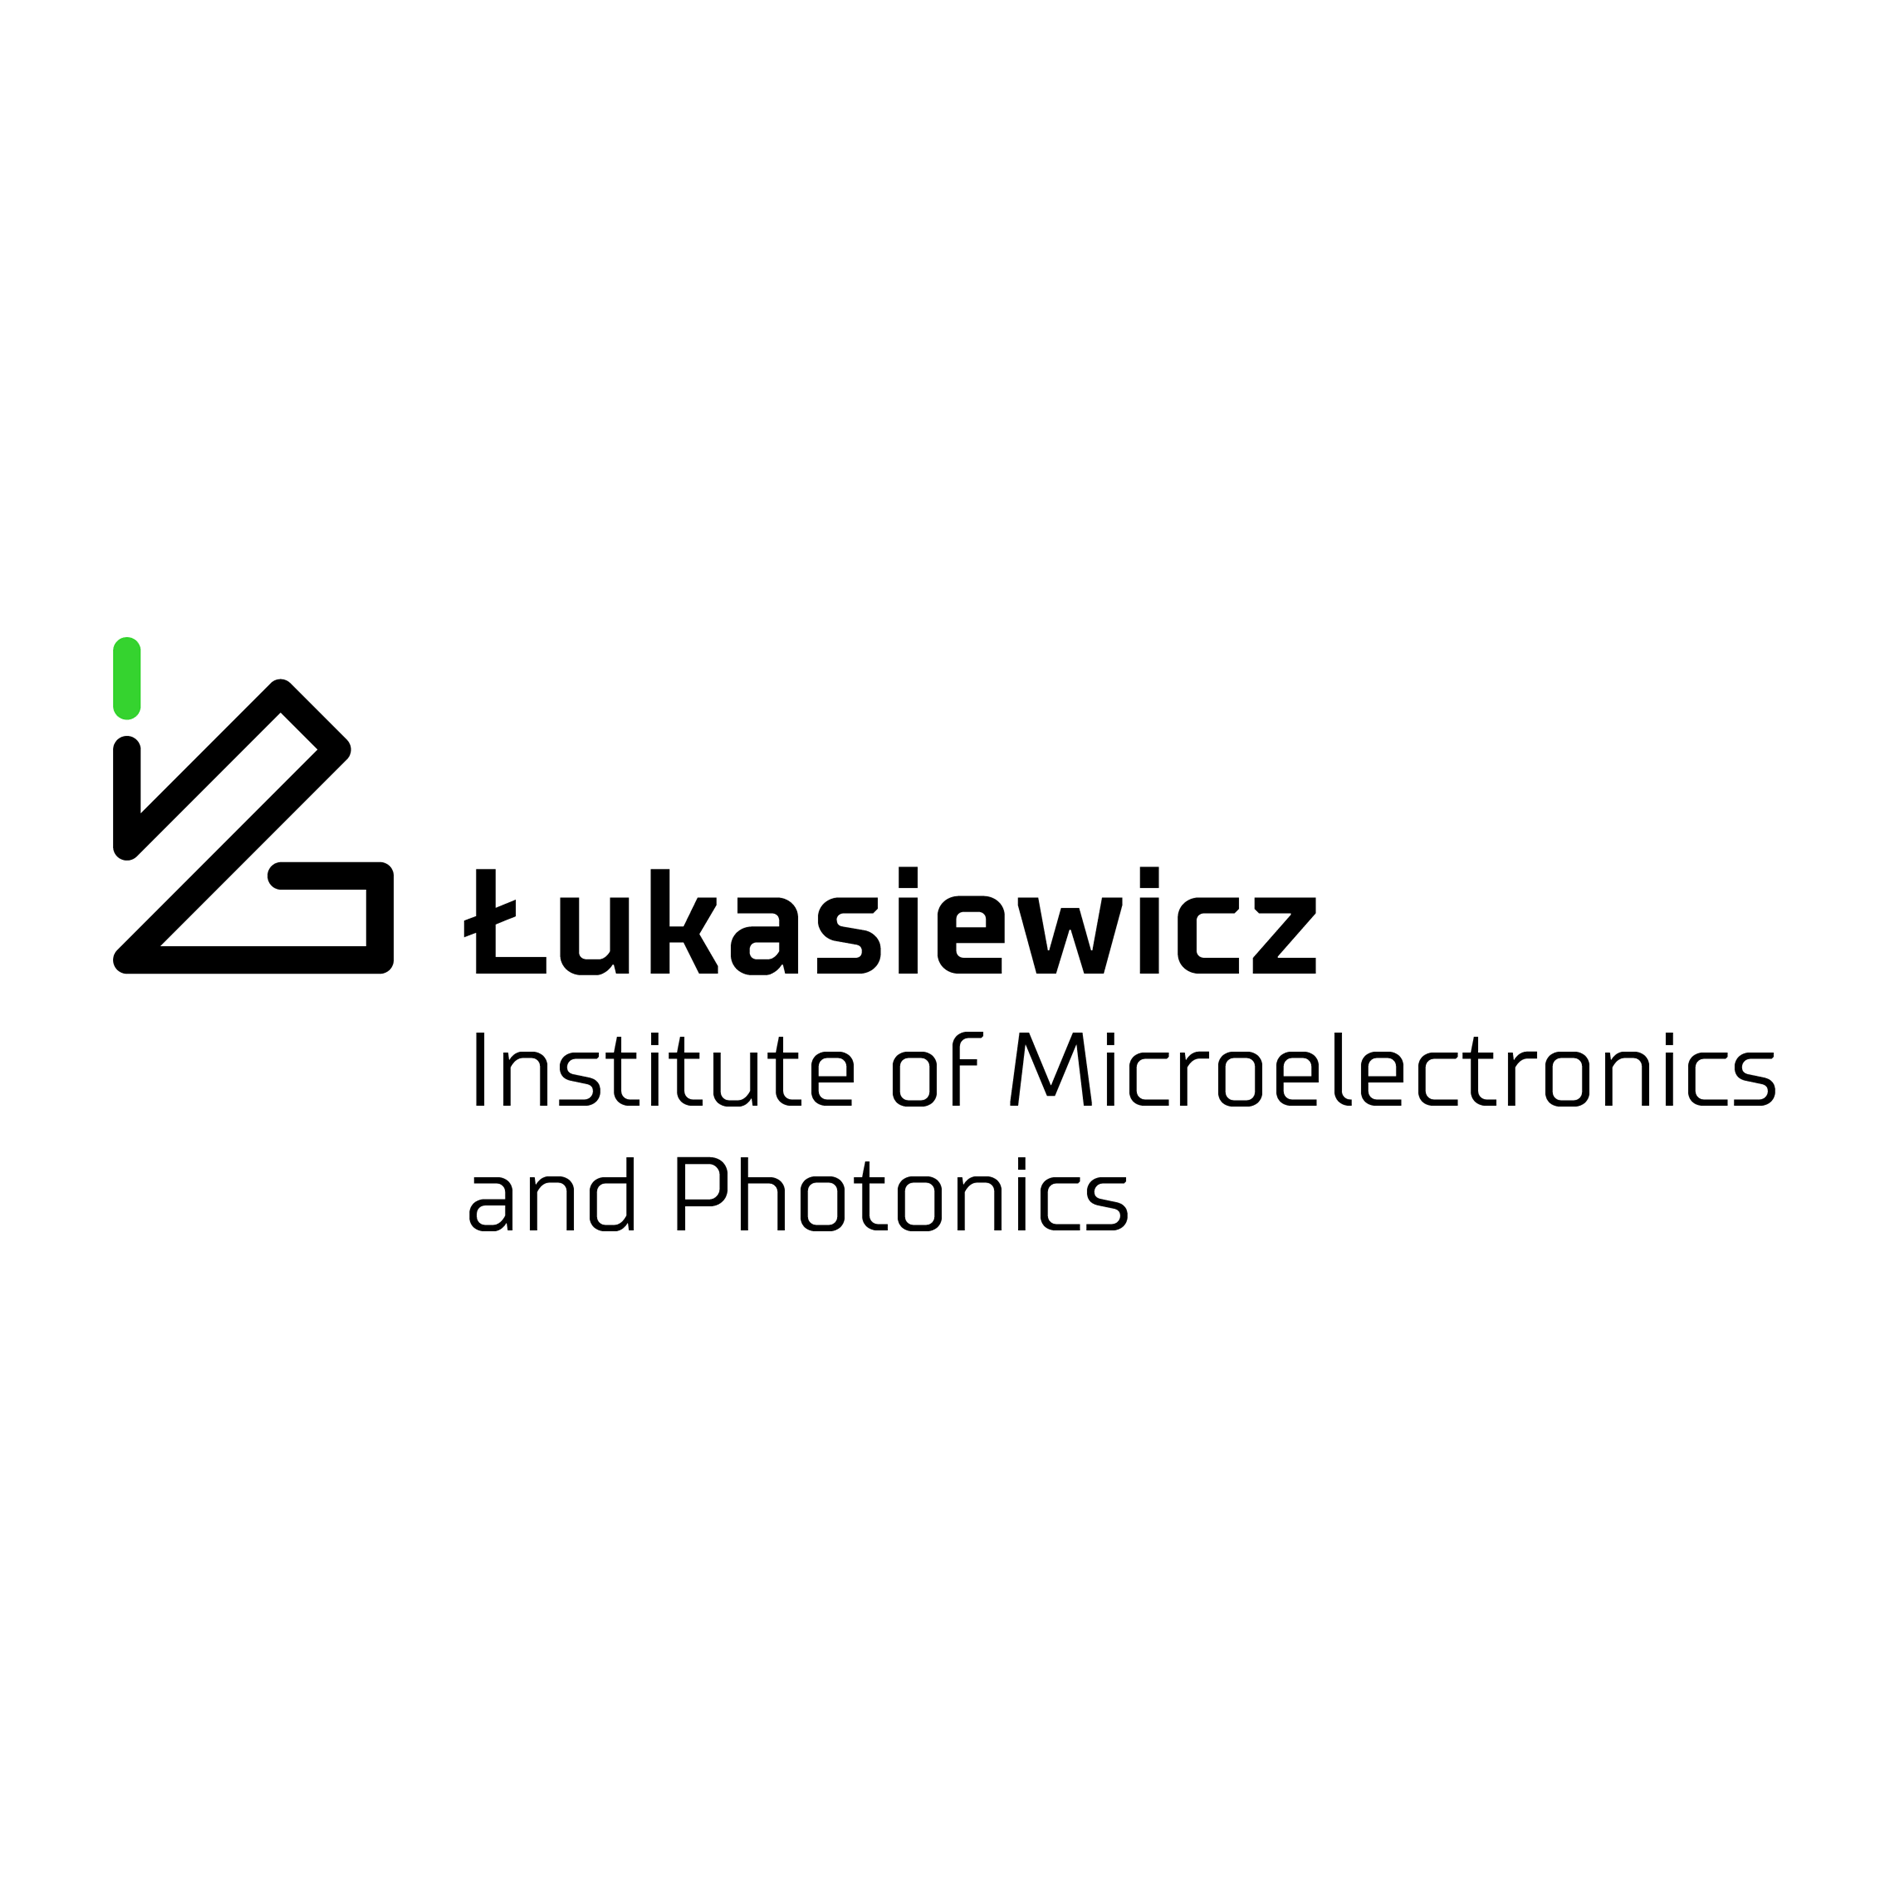 The Institute conducts scientific research and performs developmental work in the fields of micro- and nano-electronics, materials engineering, optoelectronics and nanophotonics, microwave electronics, power electronics, transparent and flexible electronics